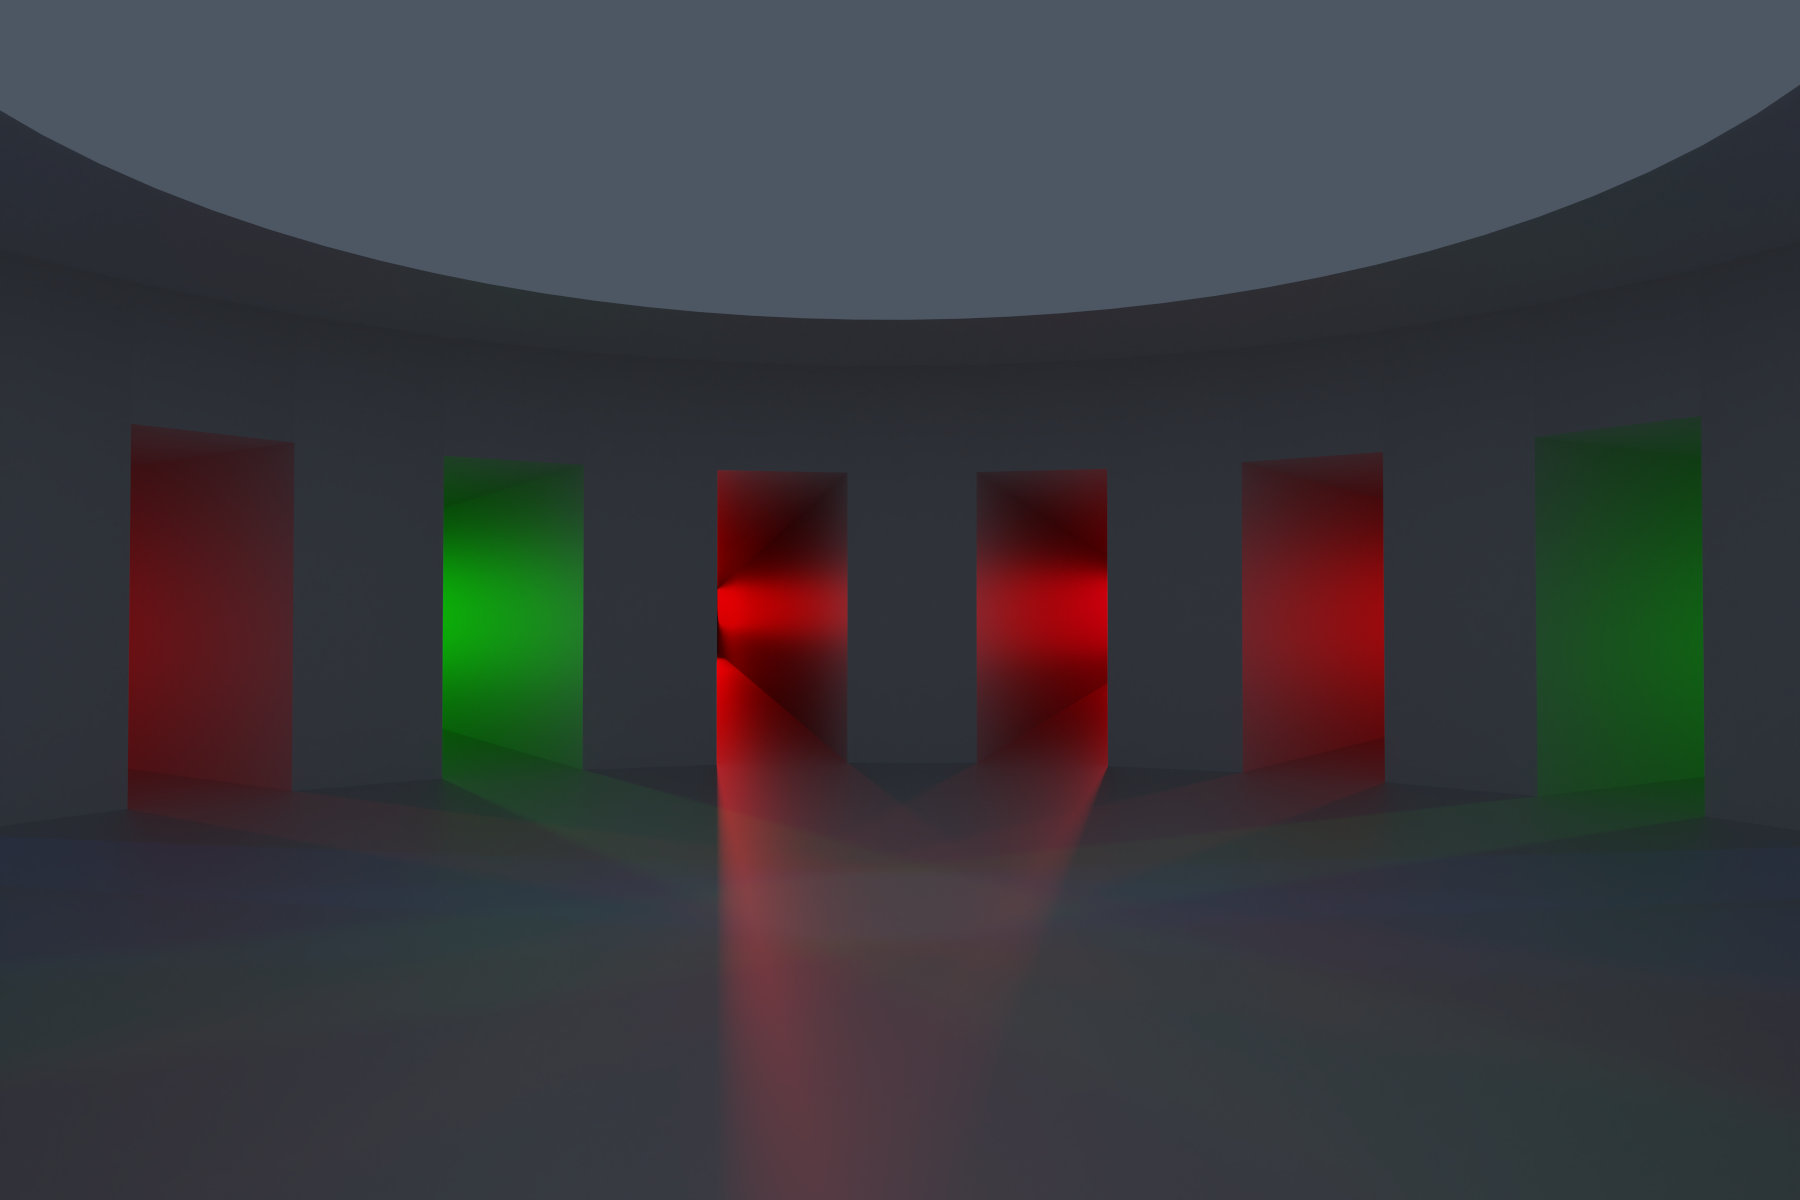 Virtual abstract scenery, Abstract digital art, Raytracing, Computer-rendered image, 2022. The viewer finds himself in a round room with several possible exits. Two of them are illuminated in green, the rest in red color. The question arises which exit is the best